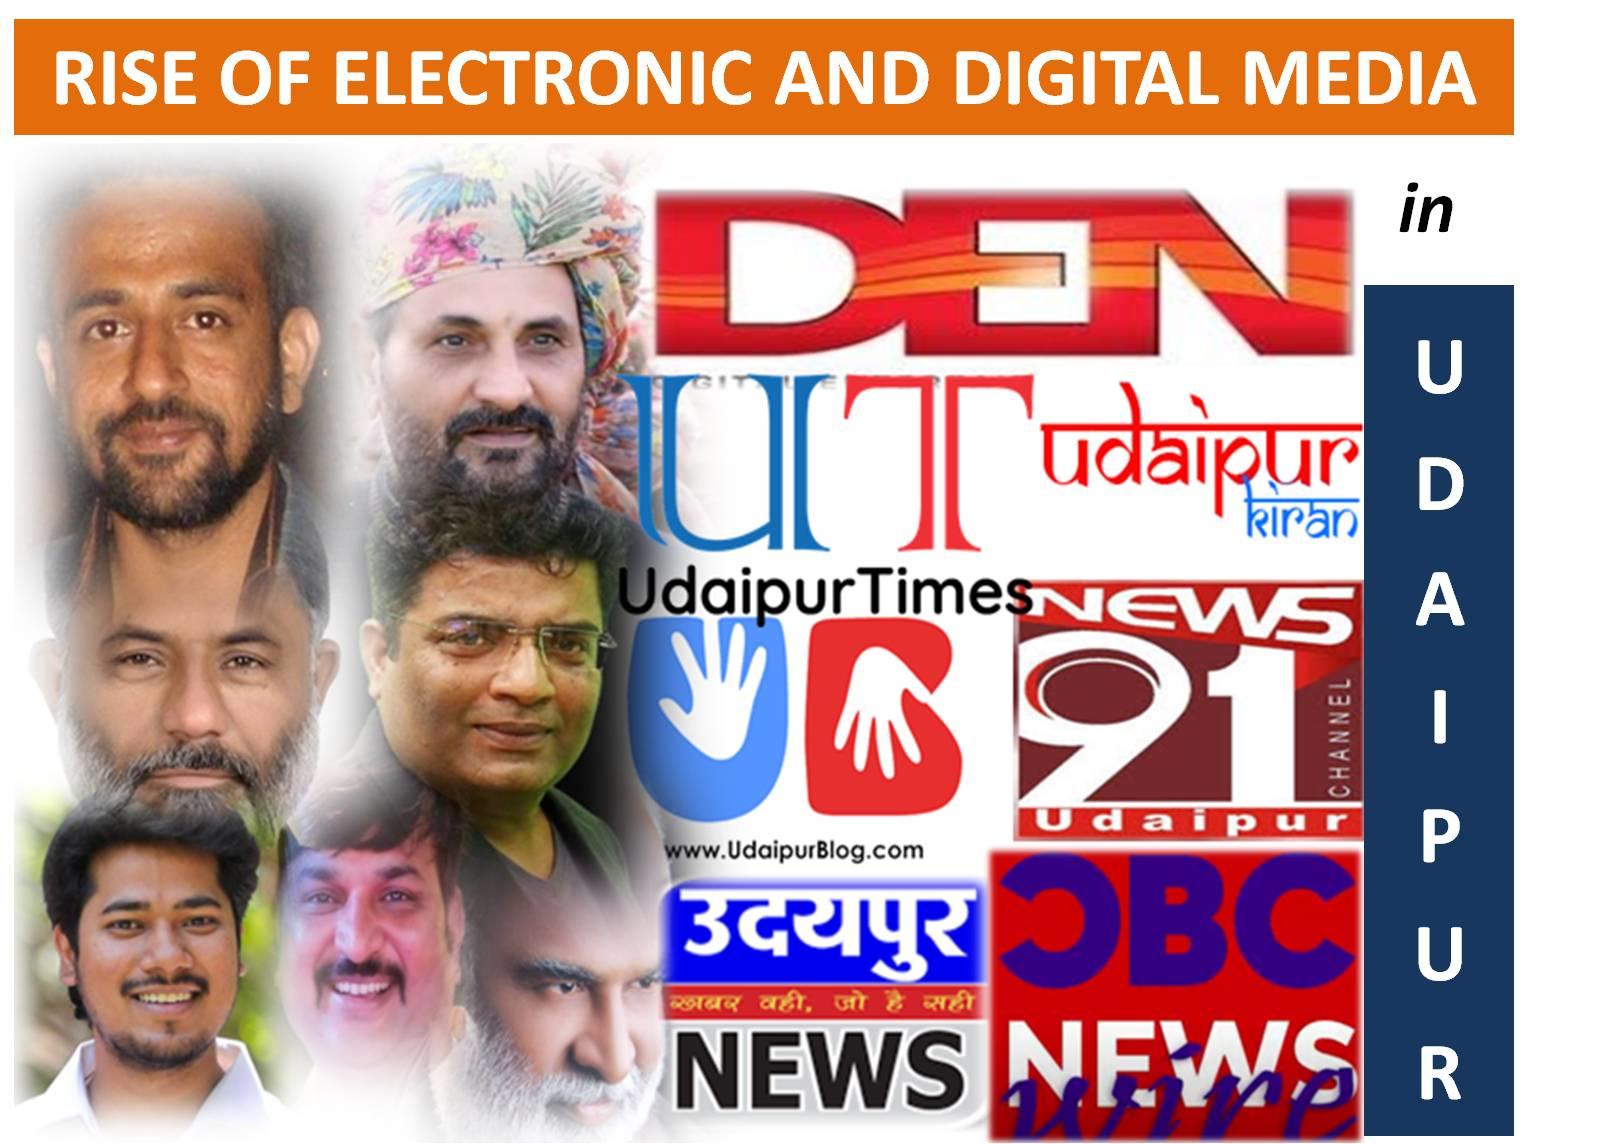 Rise of Electronic and Digital Media in Udaipur | Mention on National Press Day - 16 November